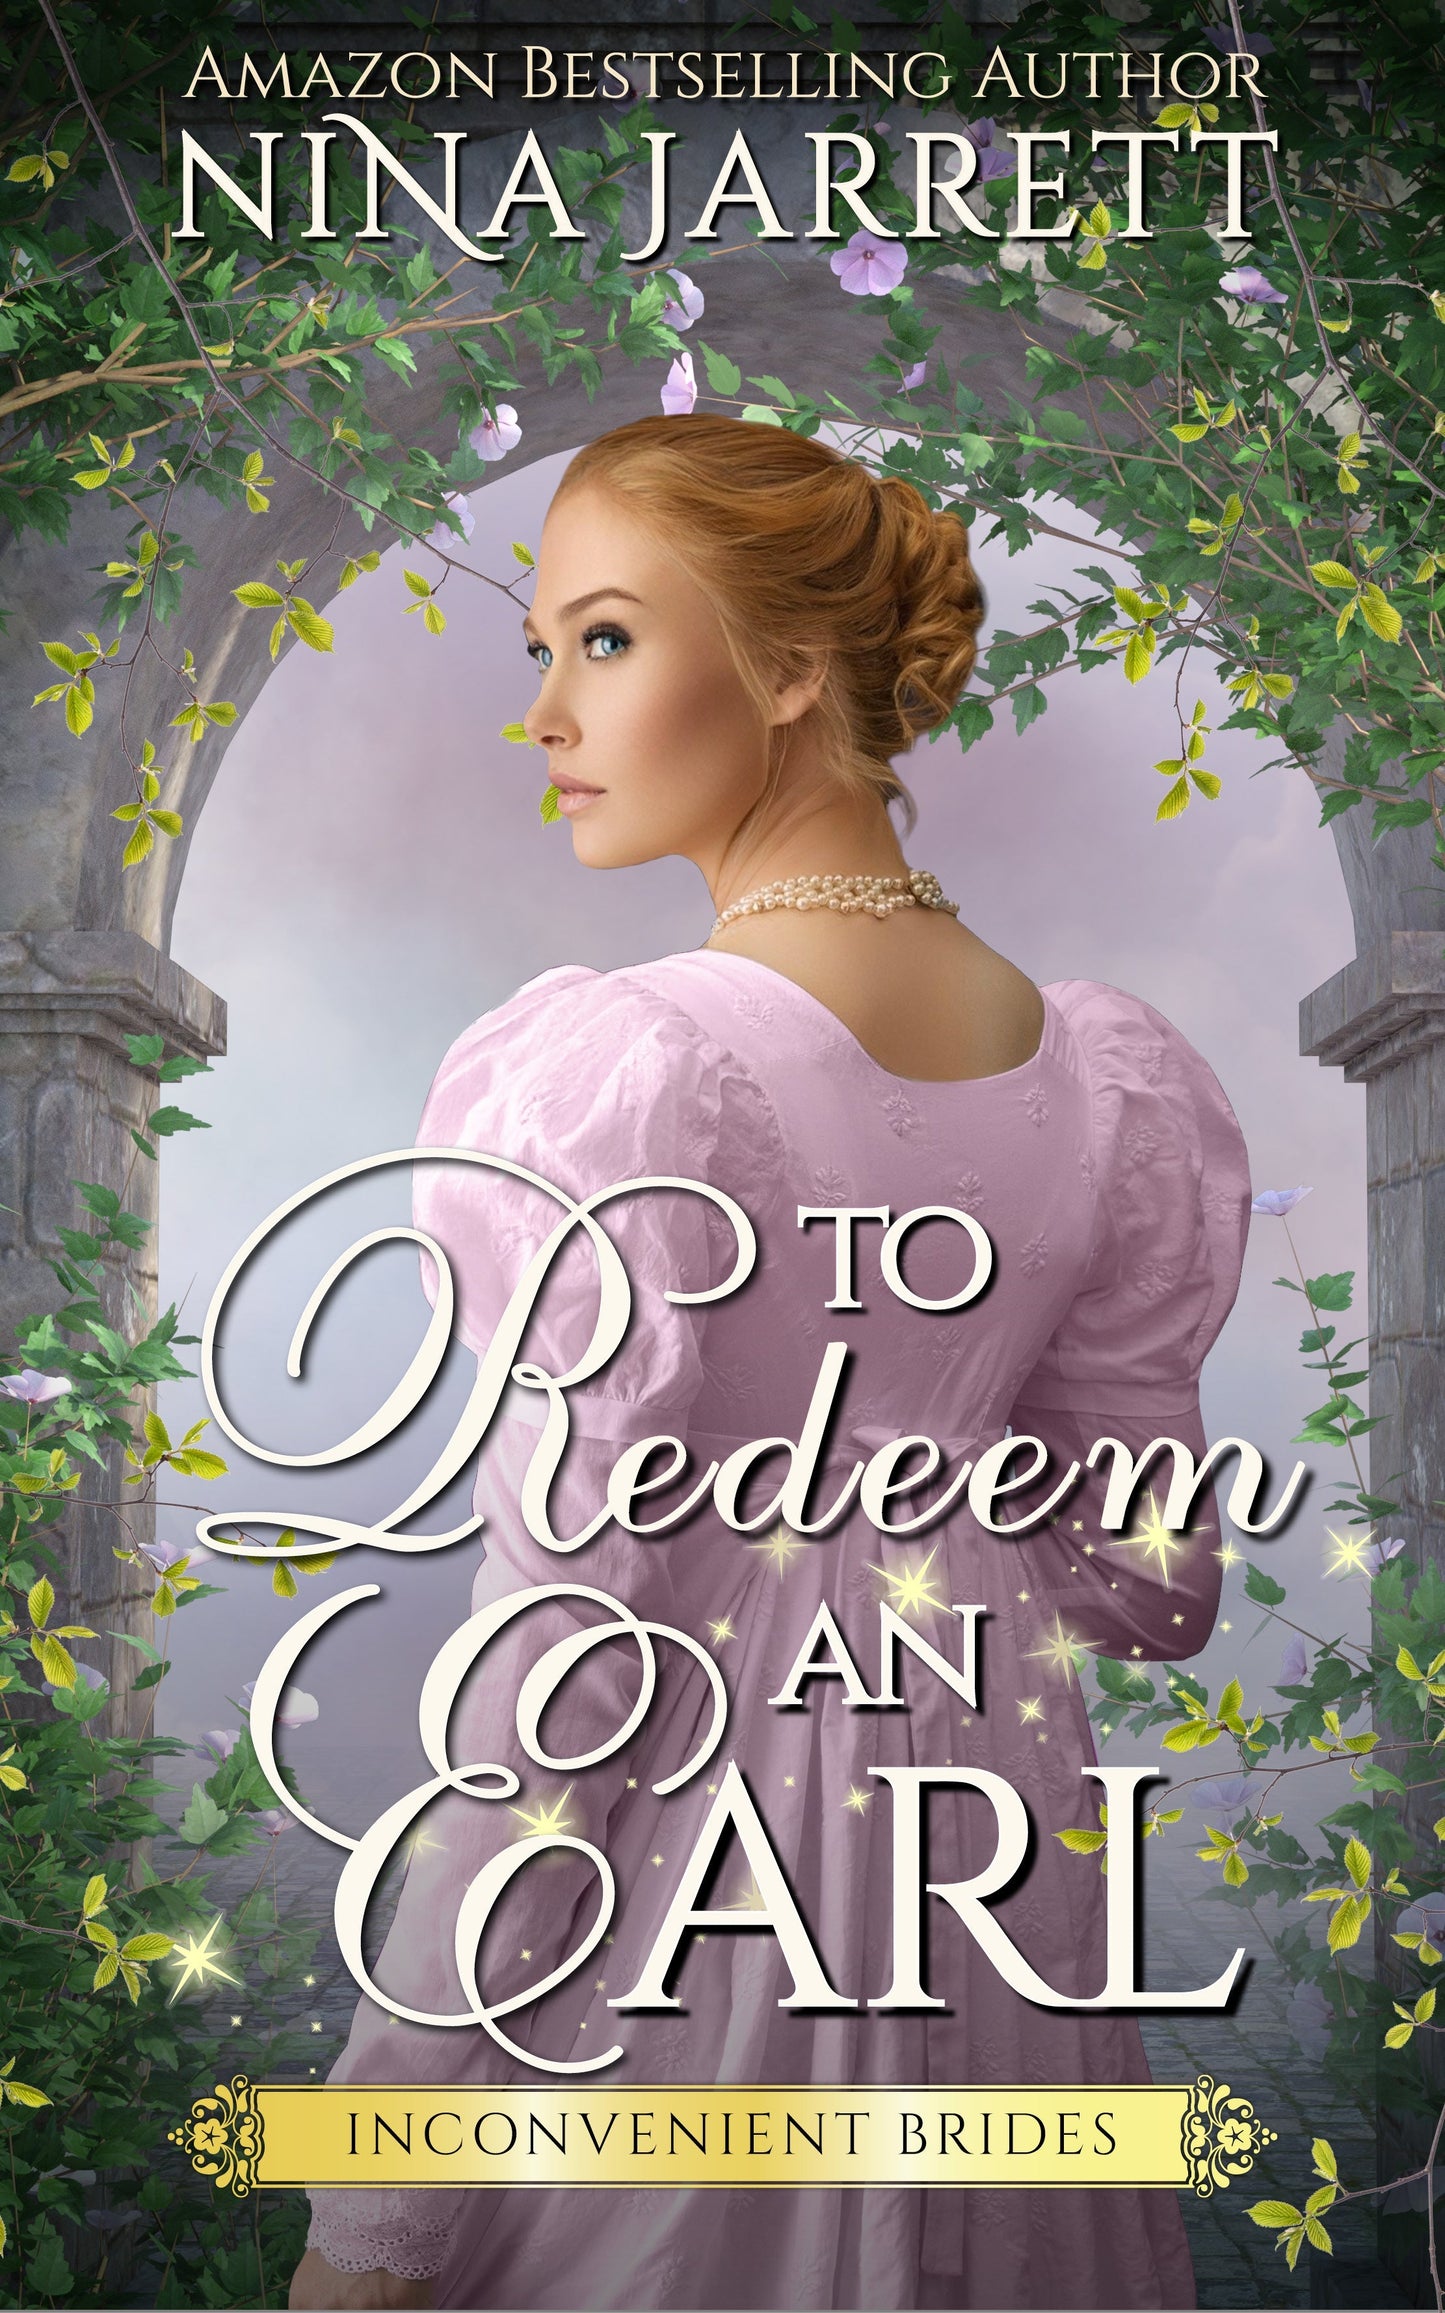 To Redeem an Earl (Book 2 - paperback)